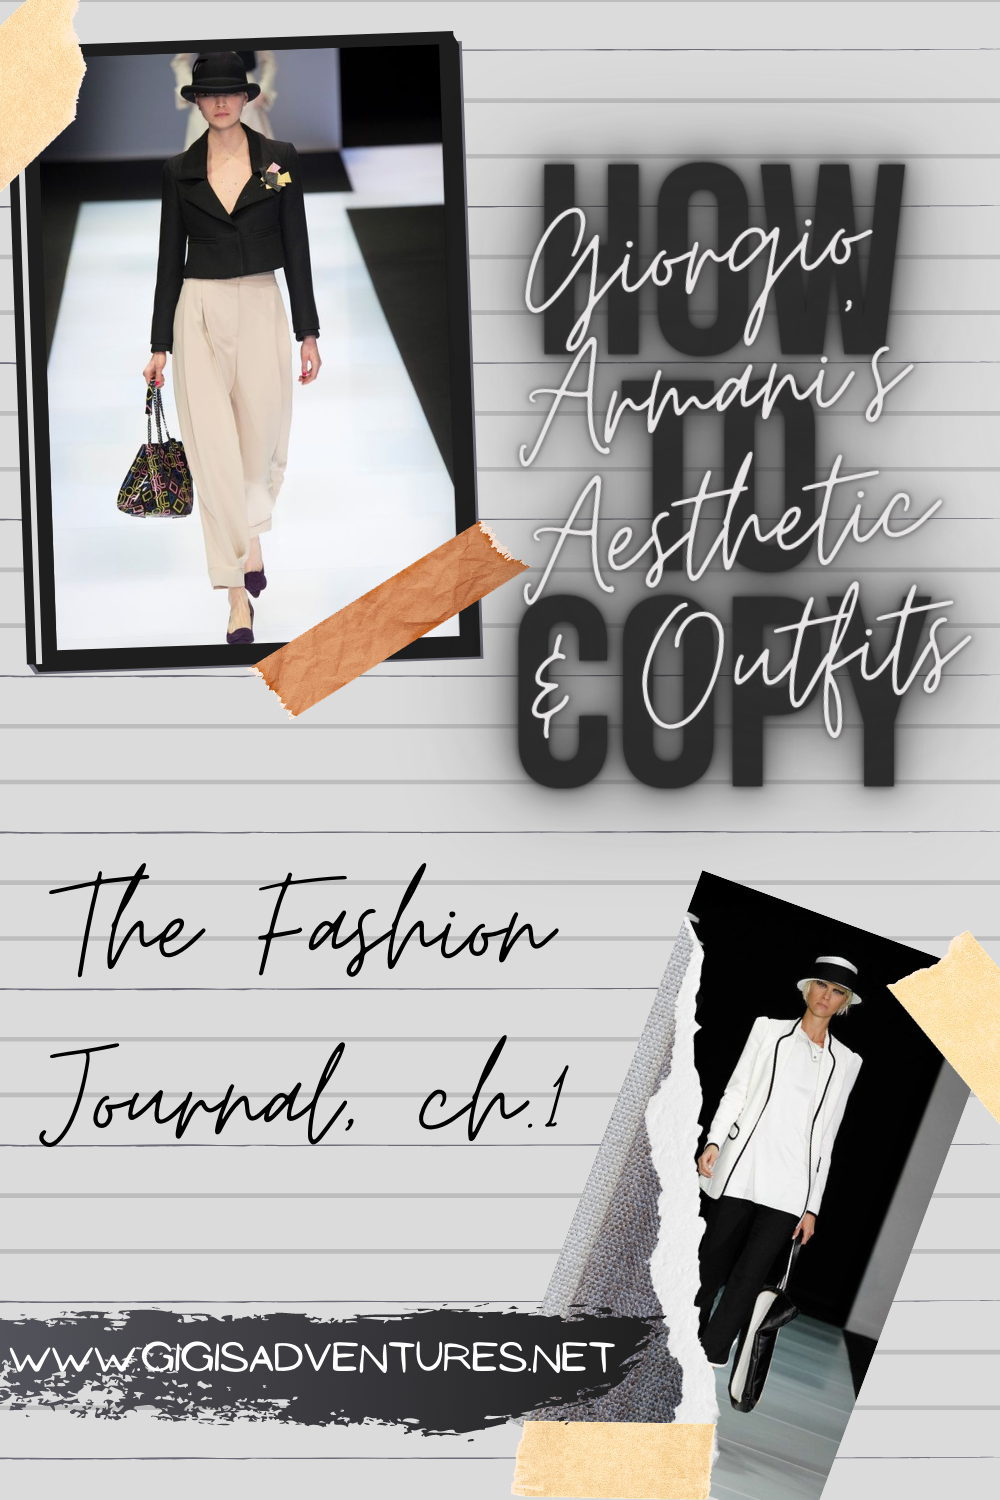 How To Copy Giorgio Armani's Aesthetic and Outfits | The Fashion Journal